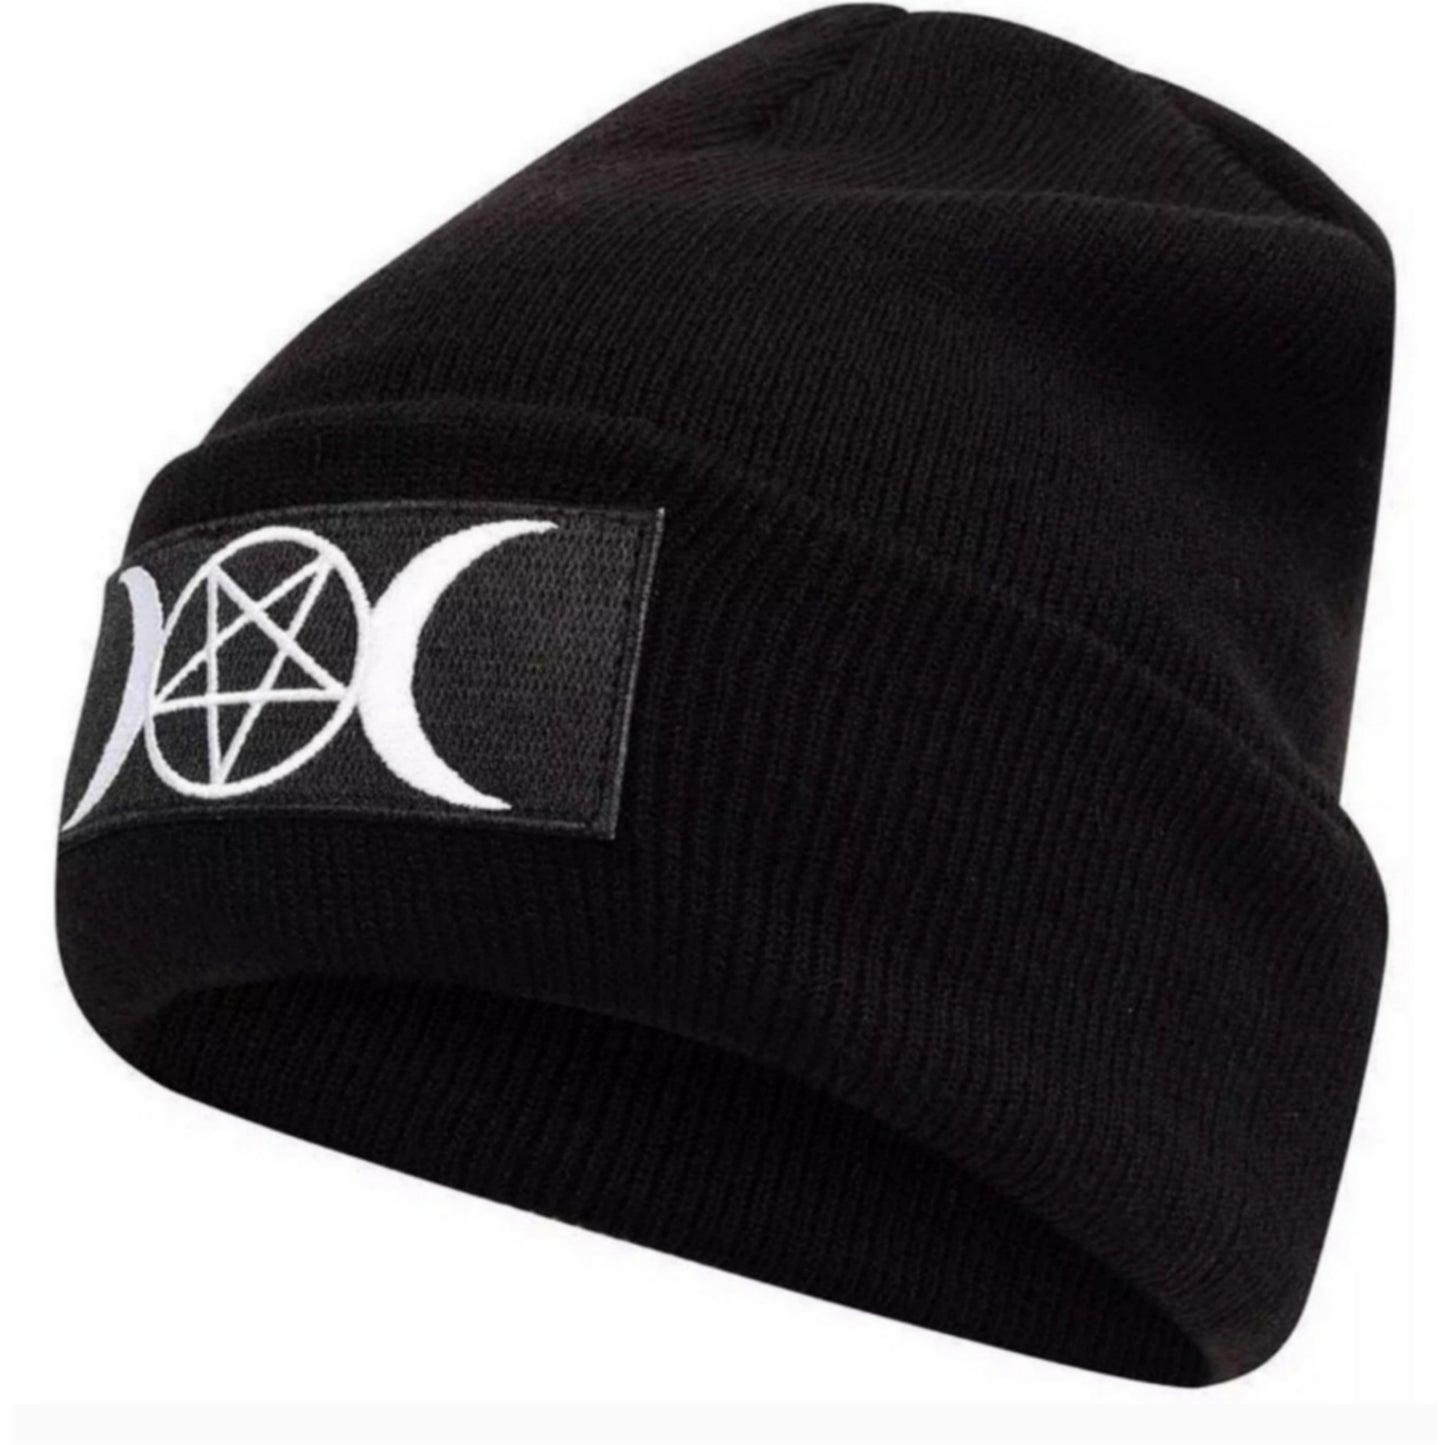 Black Triple Moon Goddess Beanie | Scully White Embroidered Moons & Pentagram - A Gothic Universe - Beanies